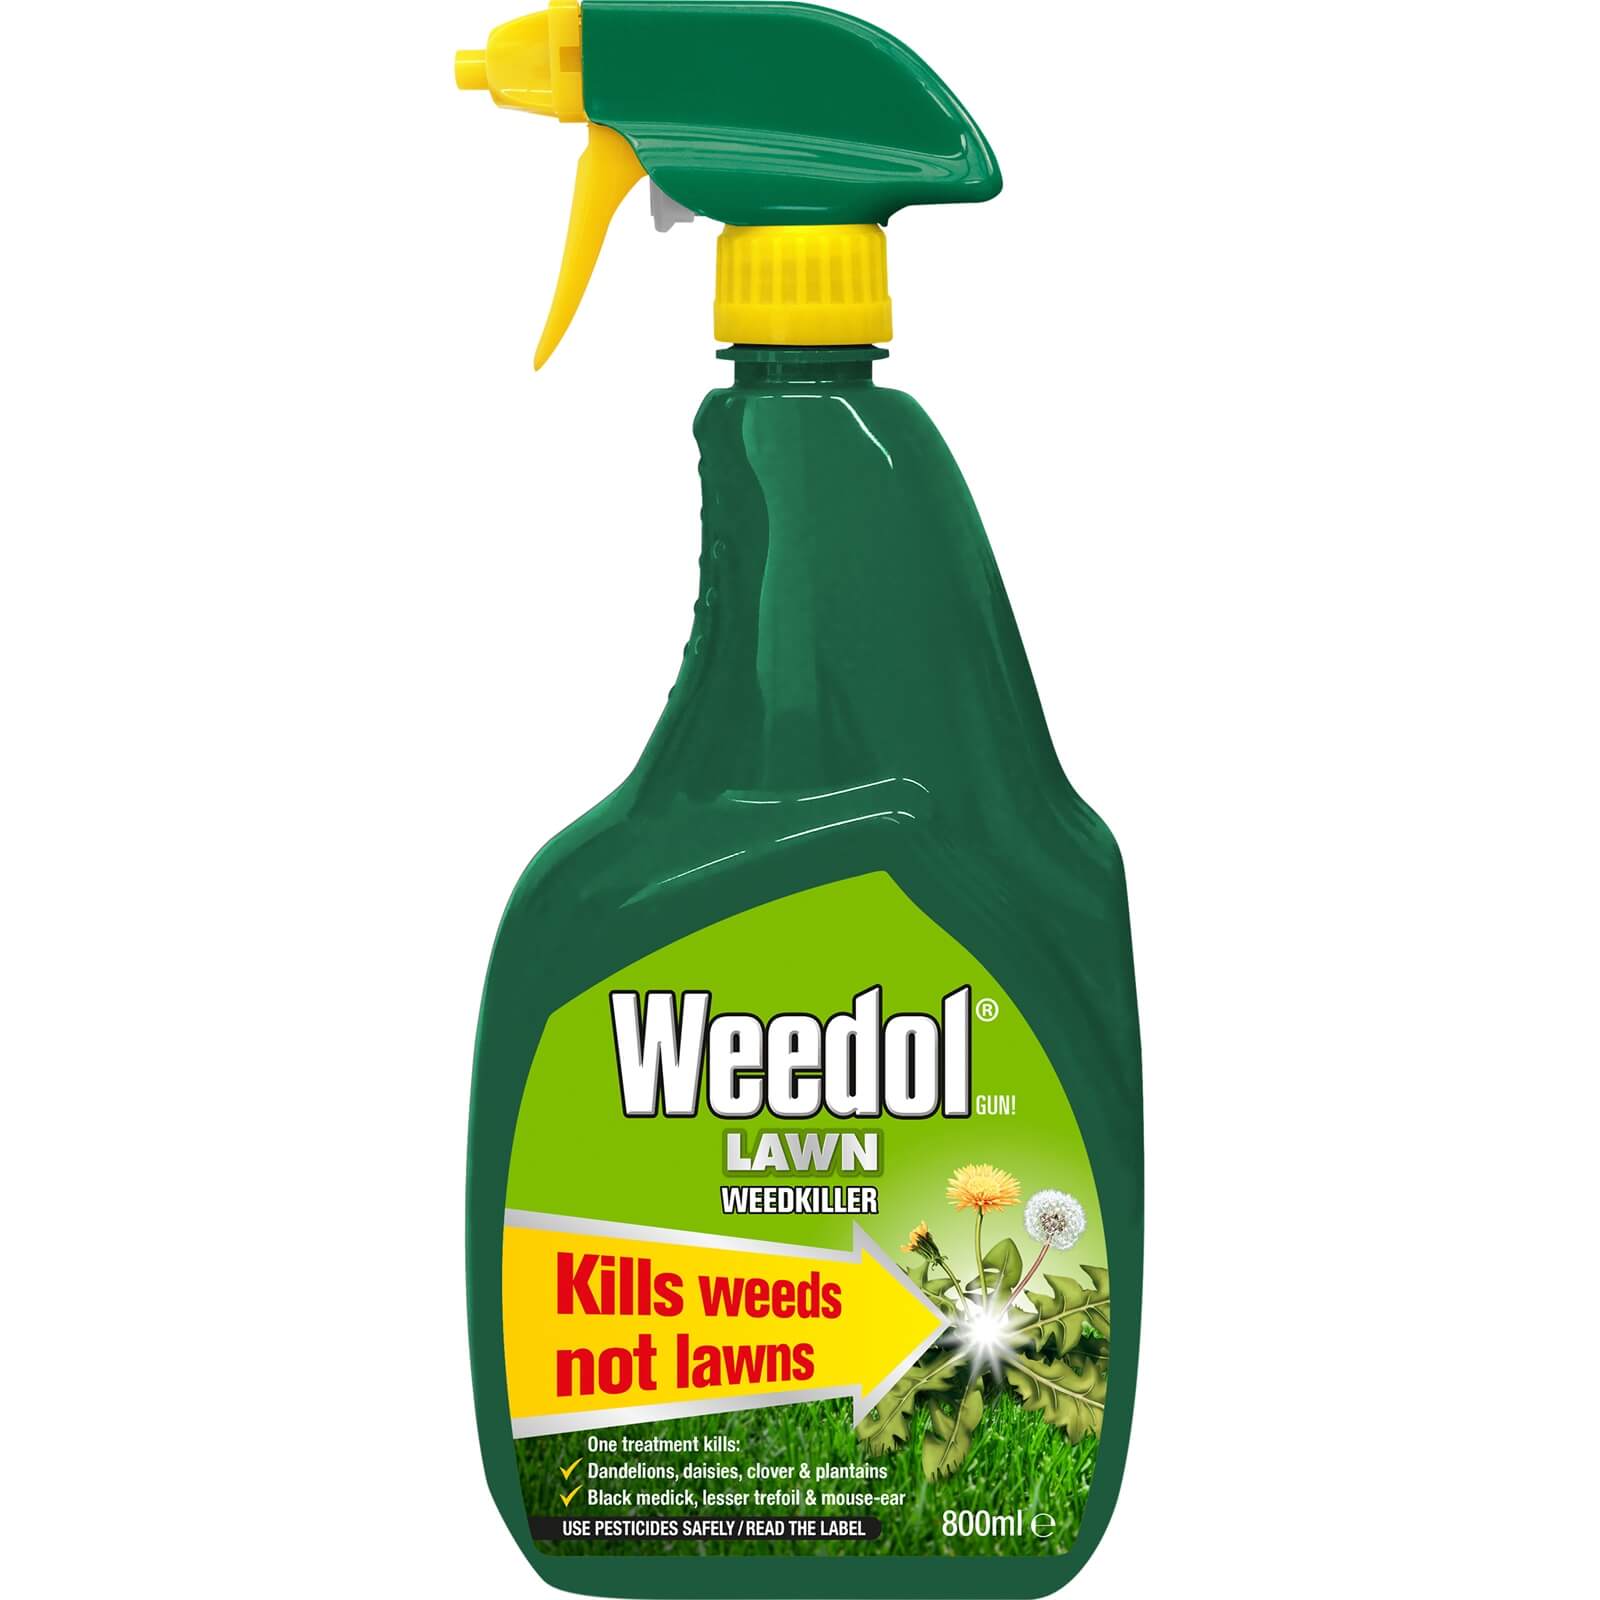 Photo of Weedol Gun! Lawn Ready To Use Weedkiller - 800ml